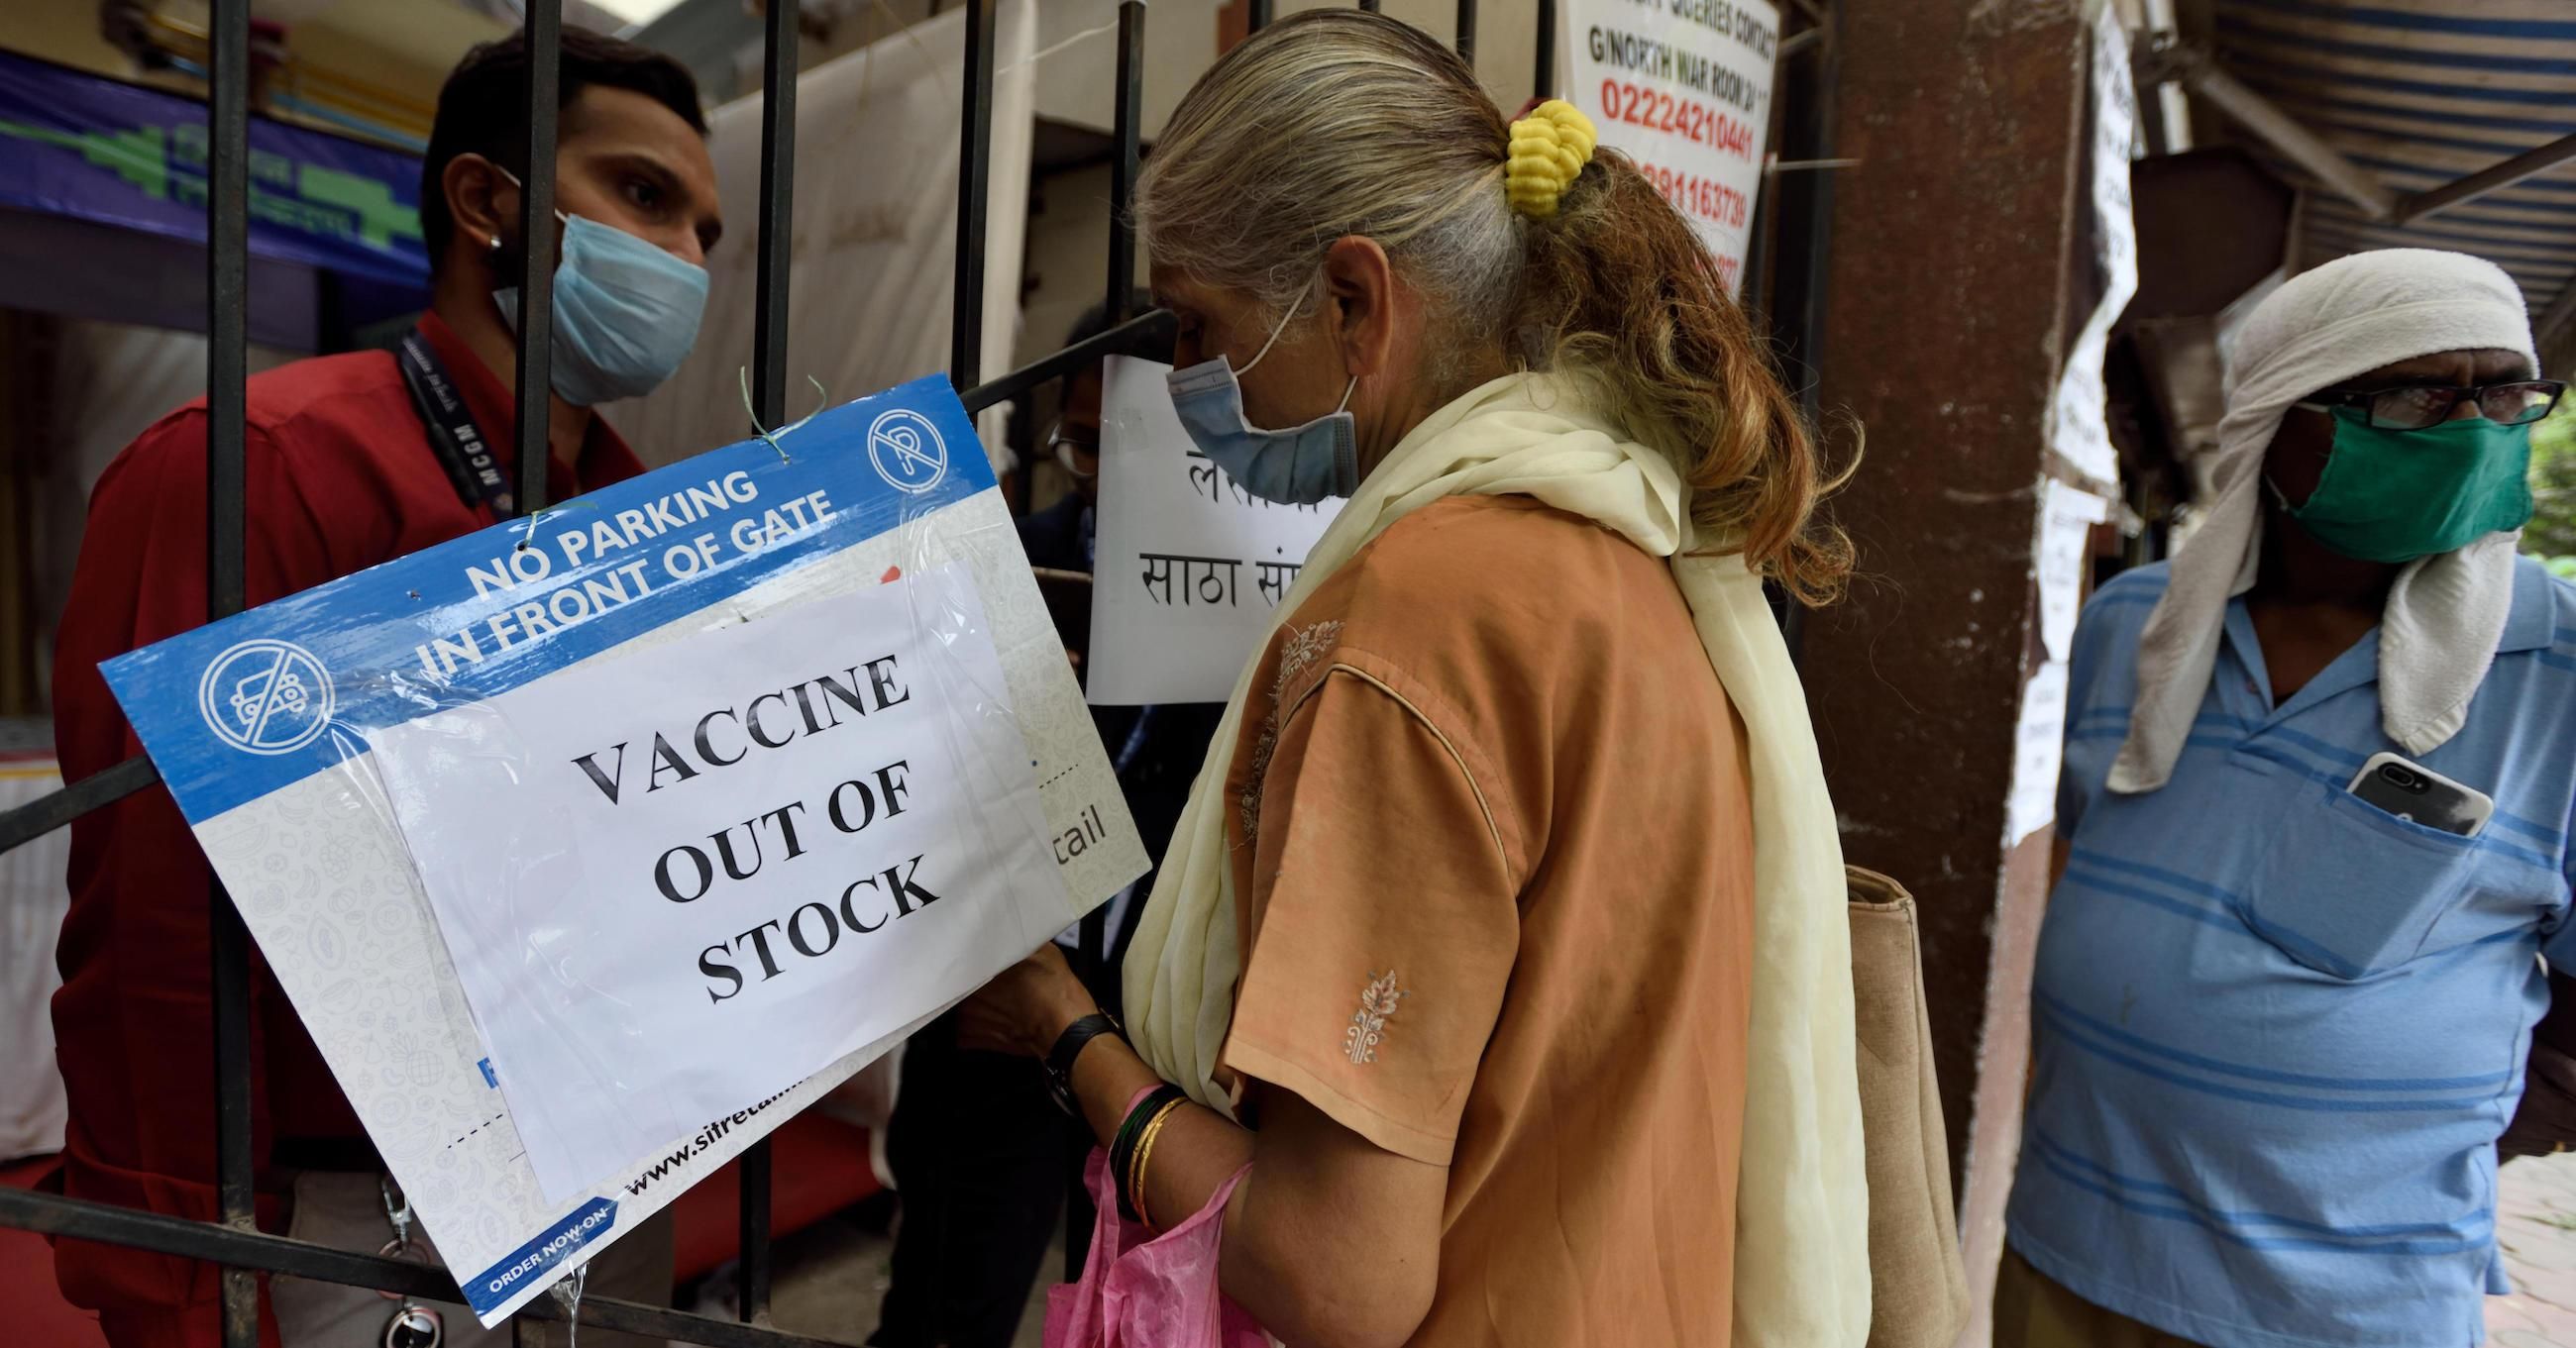 A public notice hangs outside a vaccination center notifying a shortage of vaccines in the Mahim neighborhood of Mumbai, India on April 8, 2021. (Photo: Satish Bate/Hindustan Times via Getty Images)